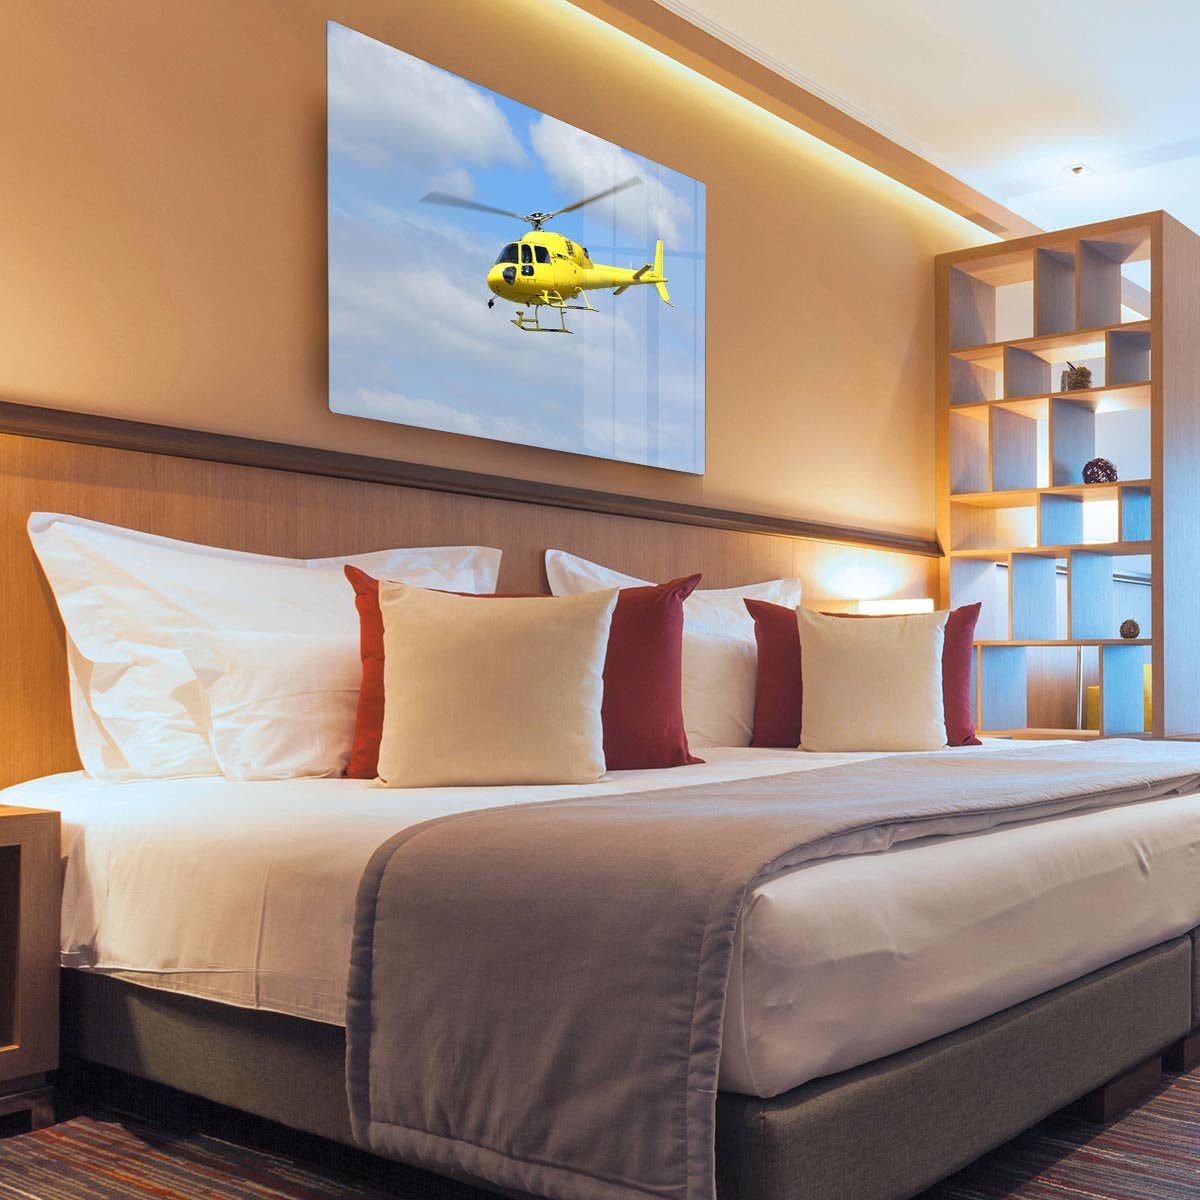 Yellow helicopter in the air HD Metal Print